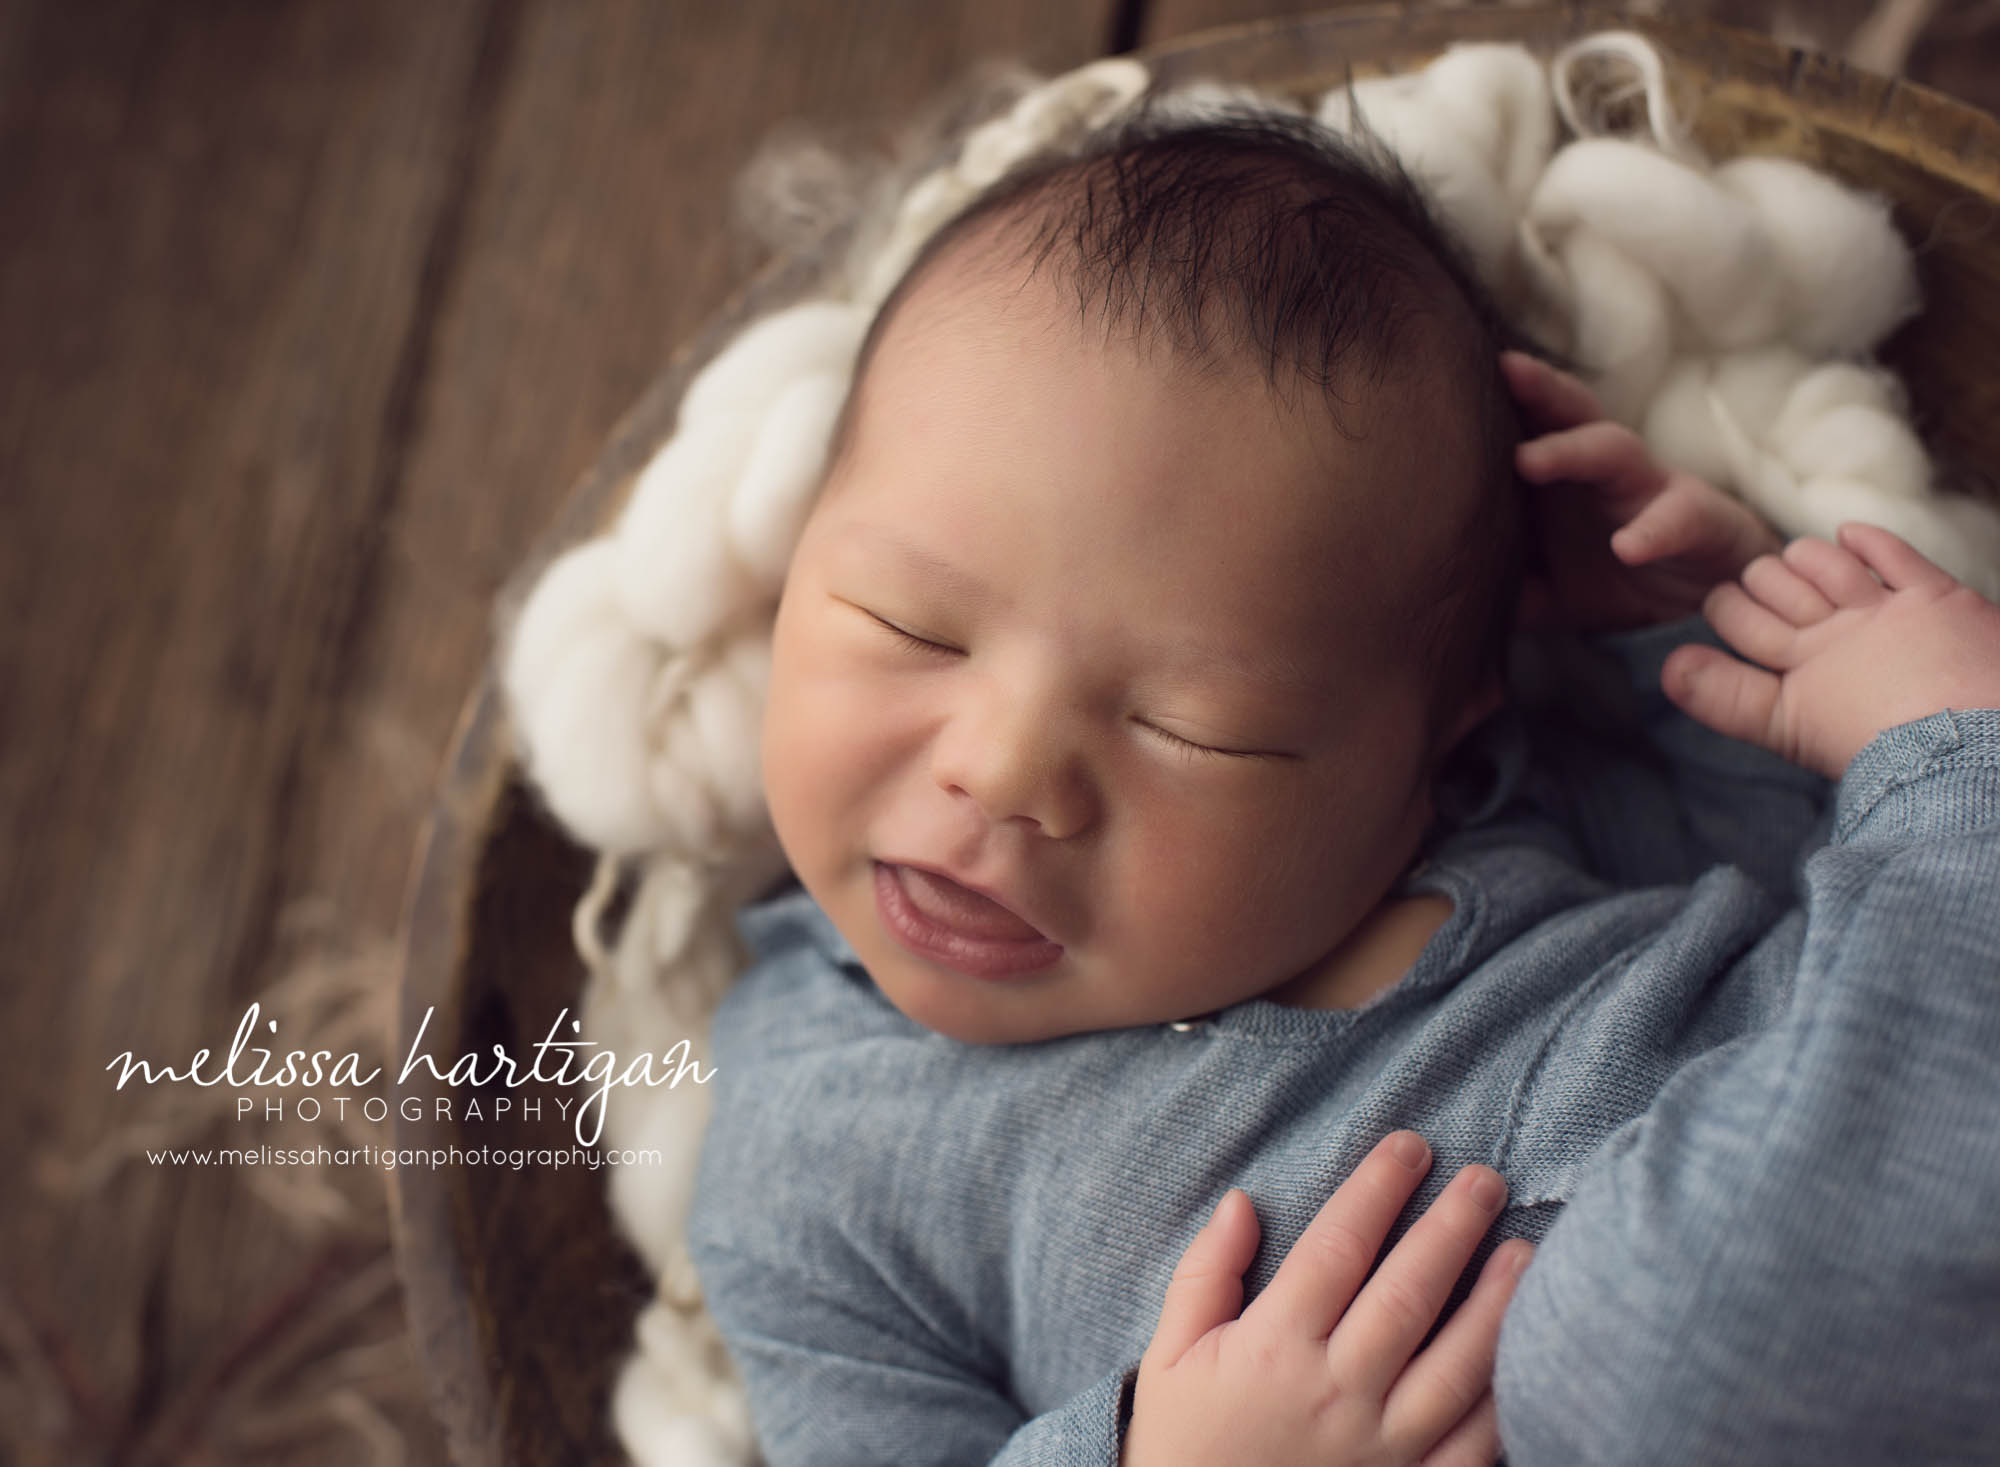 Melissa Hartigan Photography Maternity and Newborn Connecticut Photographer Lucas Newborn Session Baby boy sleeping in wooden bowl on cream knit blanket wearing blue one-piece